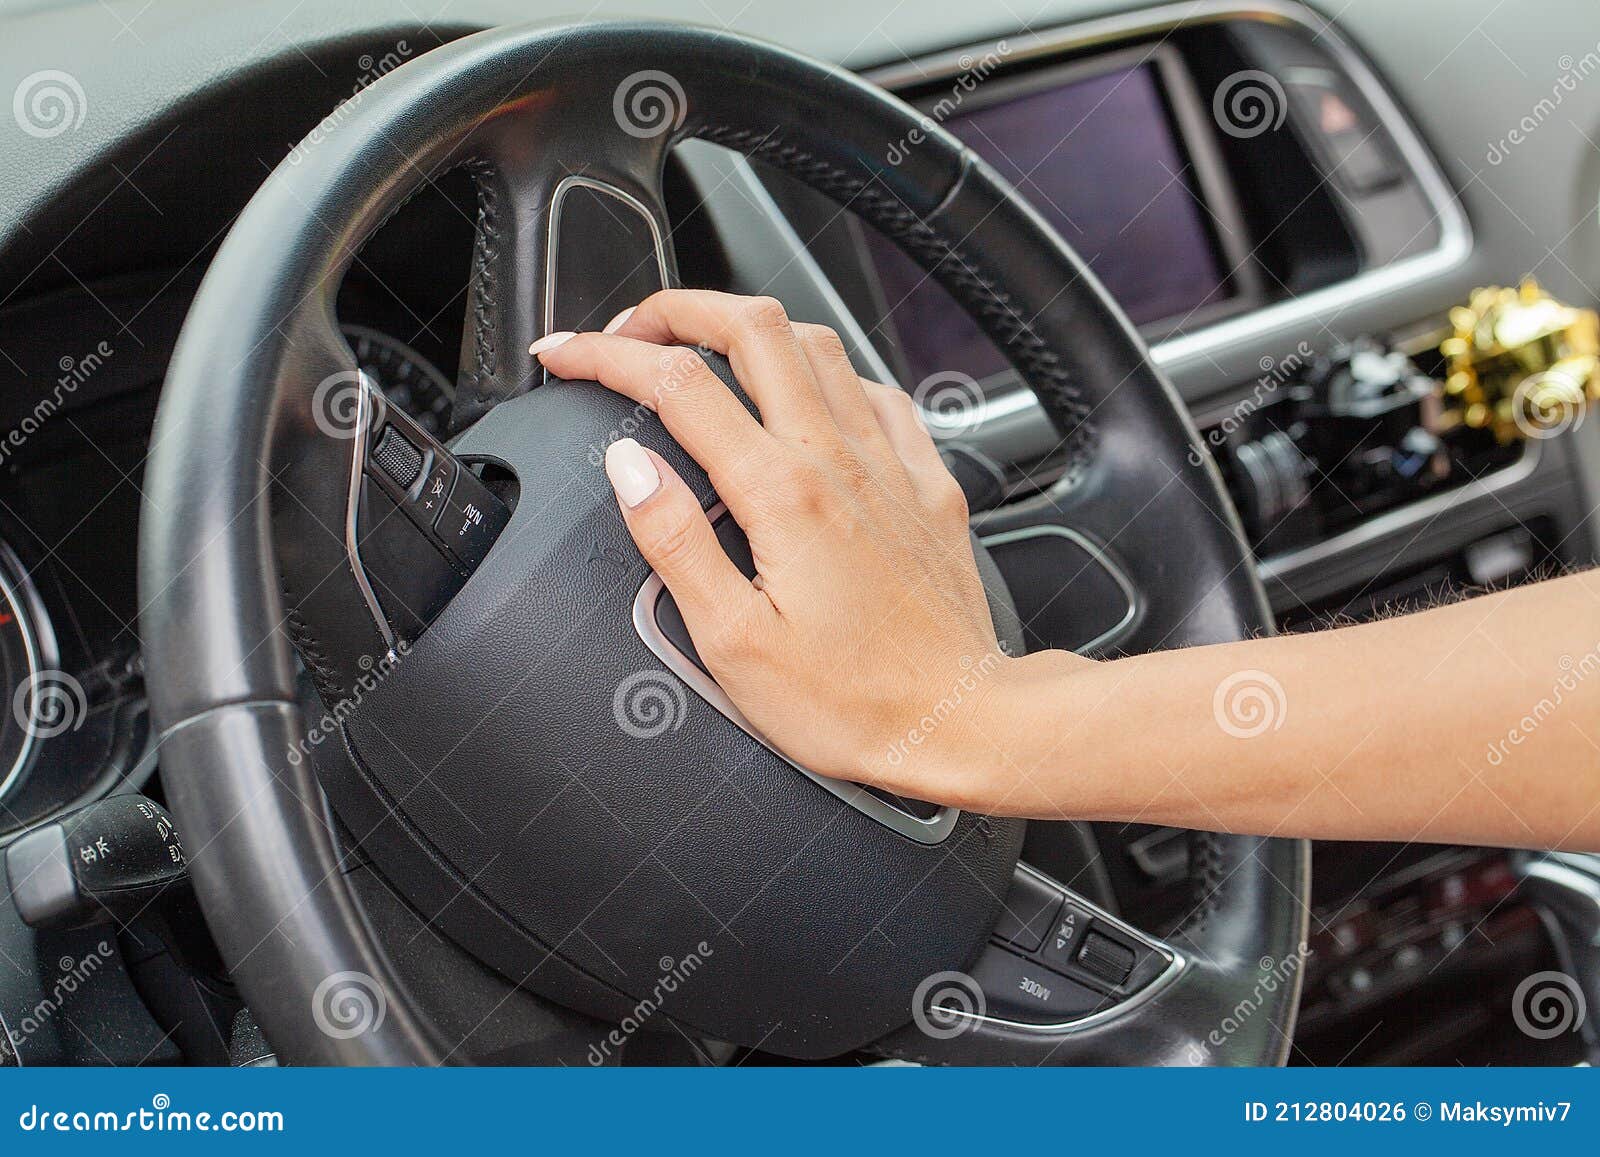 40+ Beeping Car Horn Stock Photos, Pictures & Royalty-Free Images